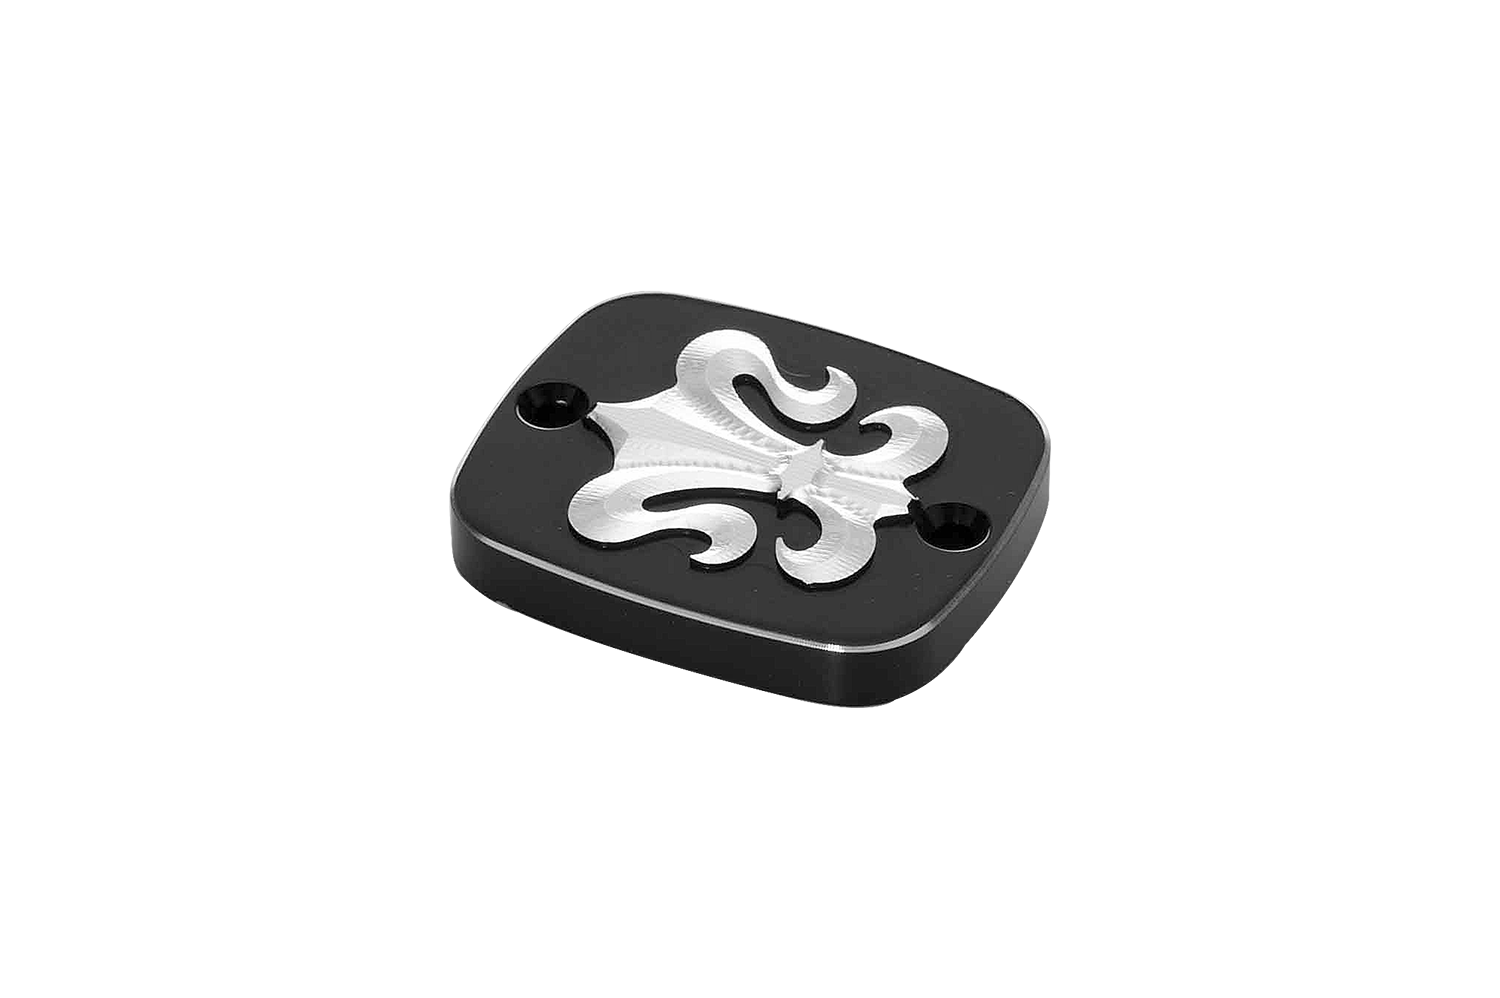 Upper Master Cylinder Cover for Harley Davidson Dyna and Softail: Fleur Edition